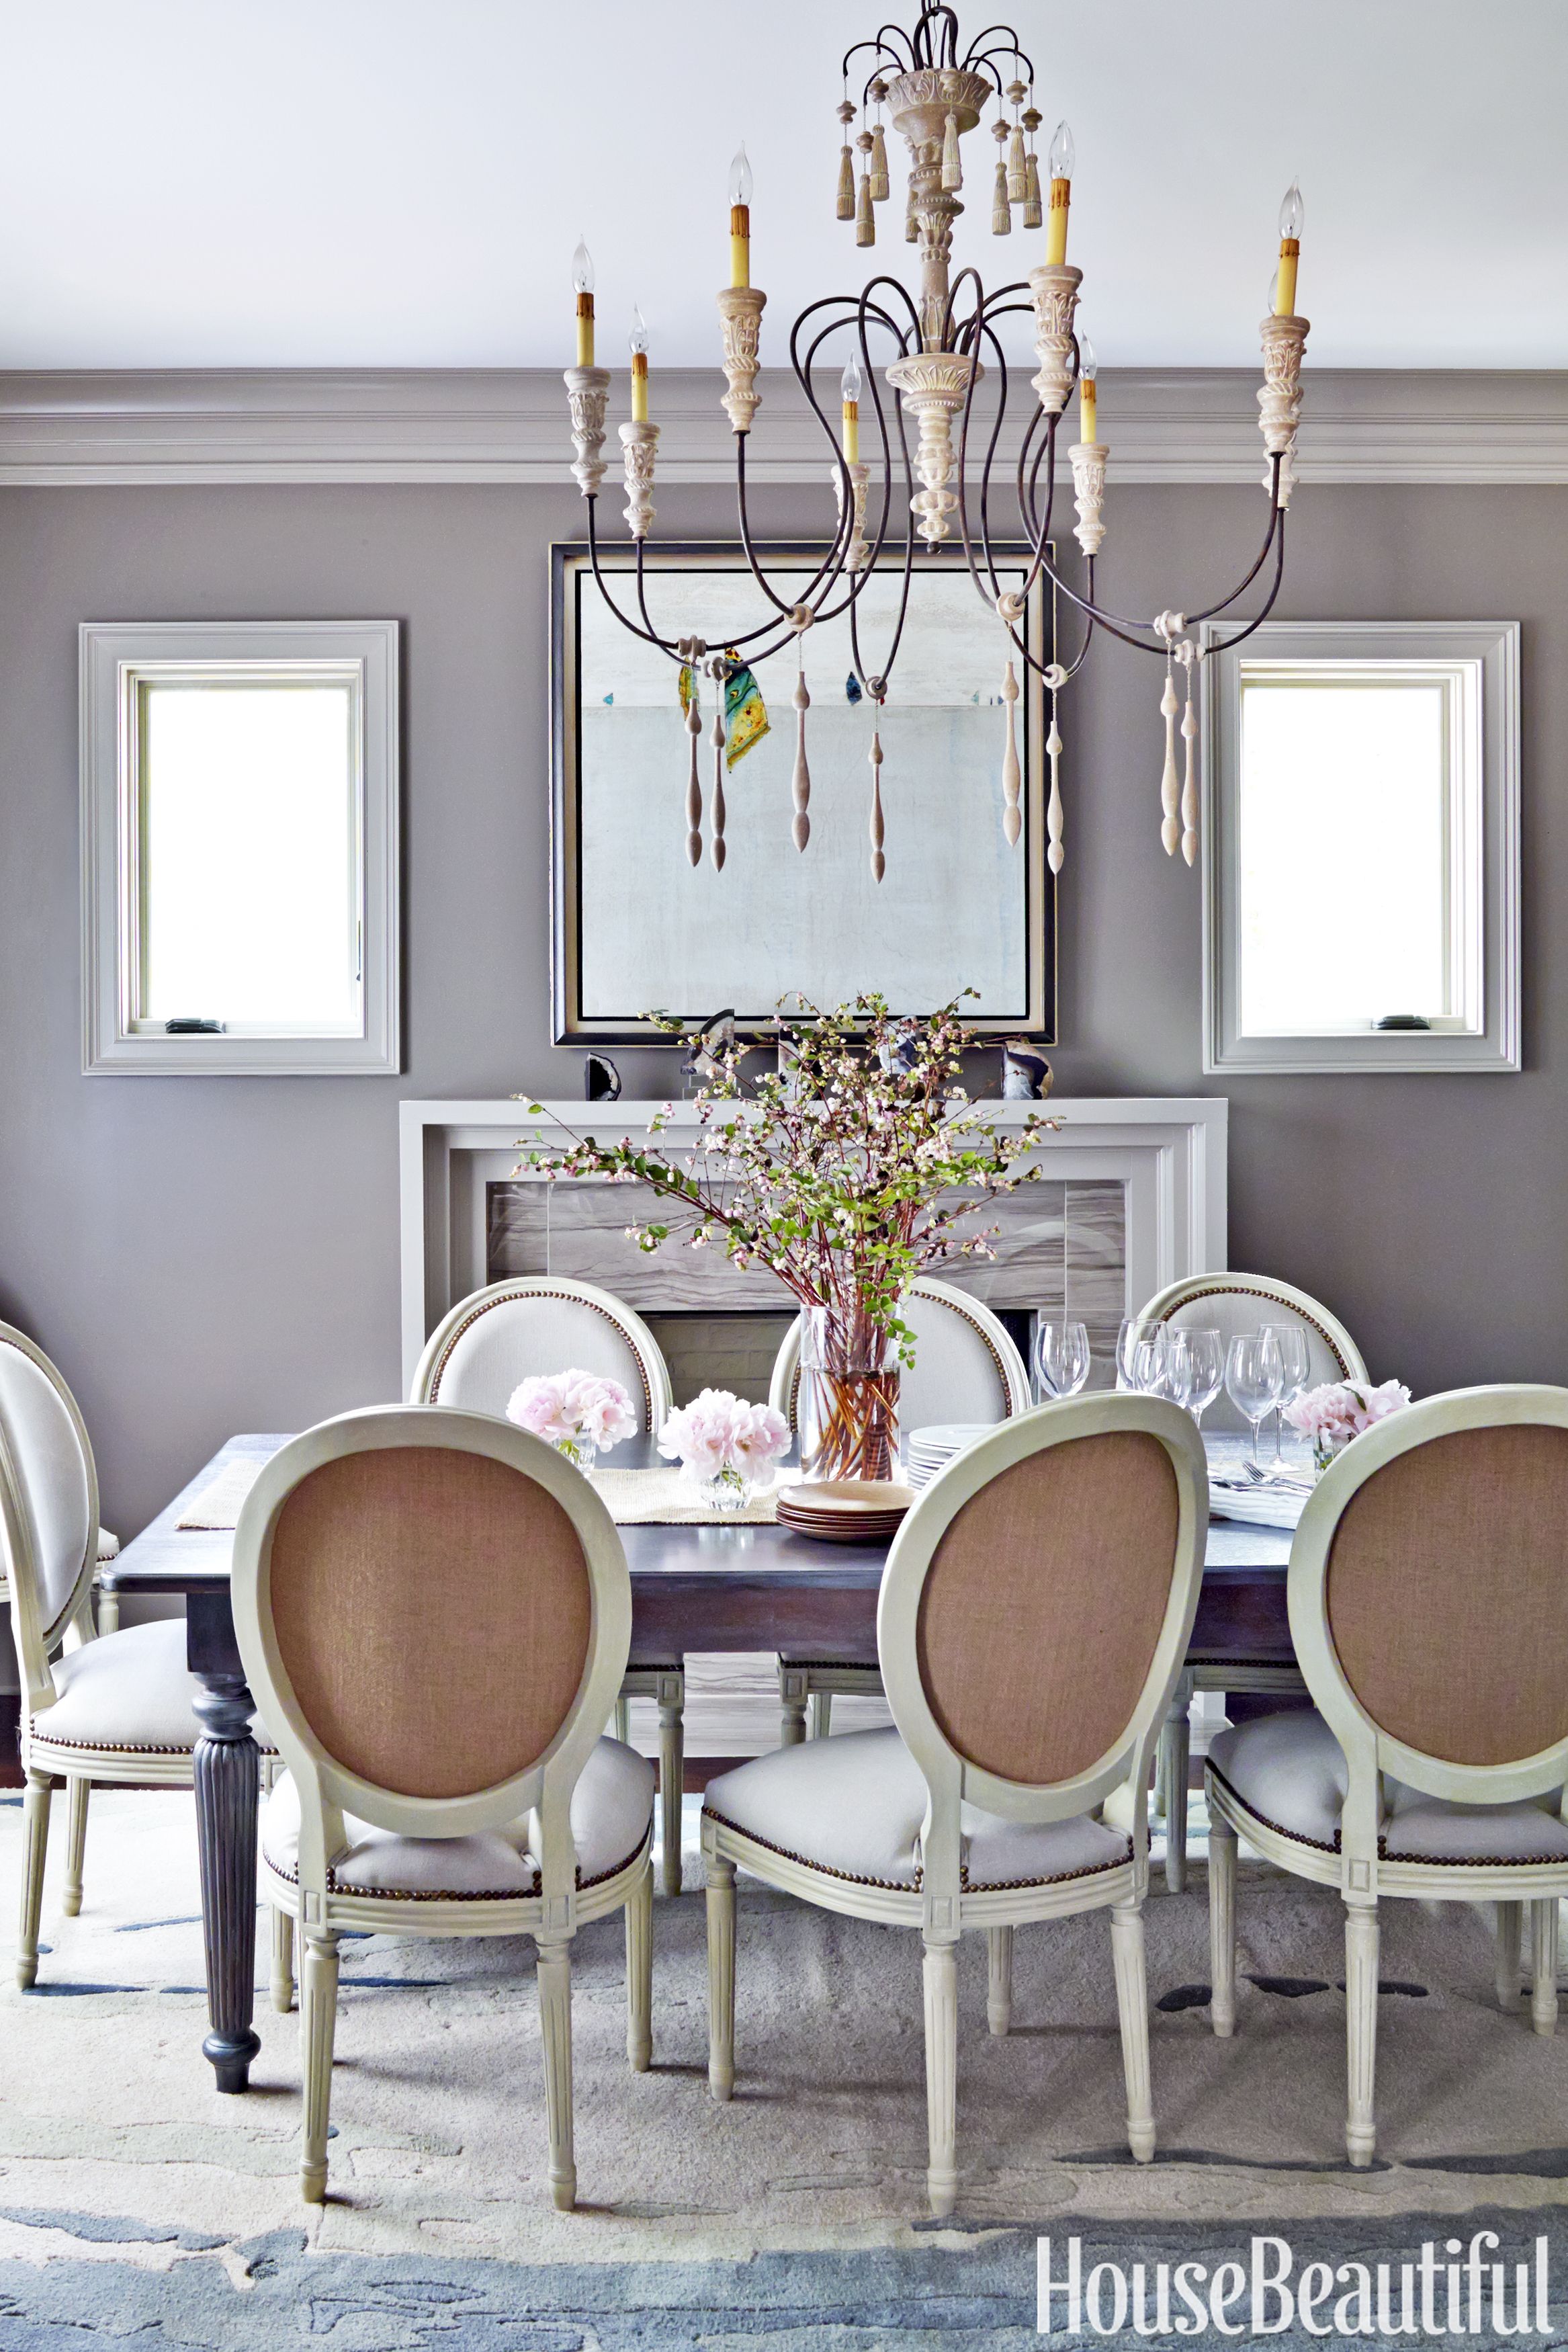 18 Best Dining Room Paint Colors, Dining Room Wall Colors Images